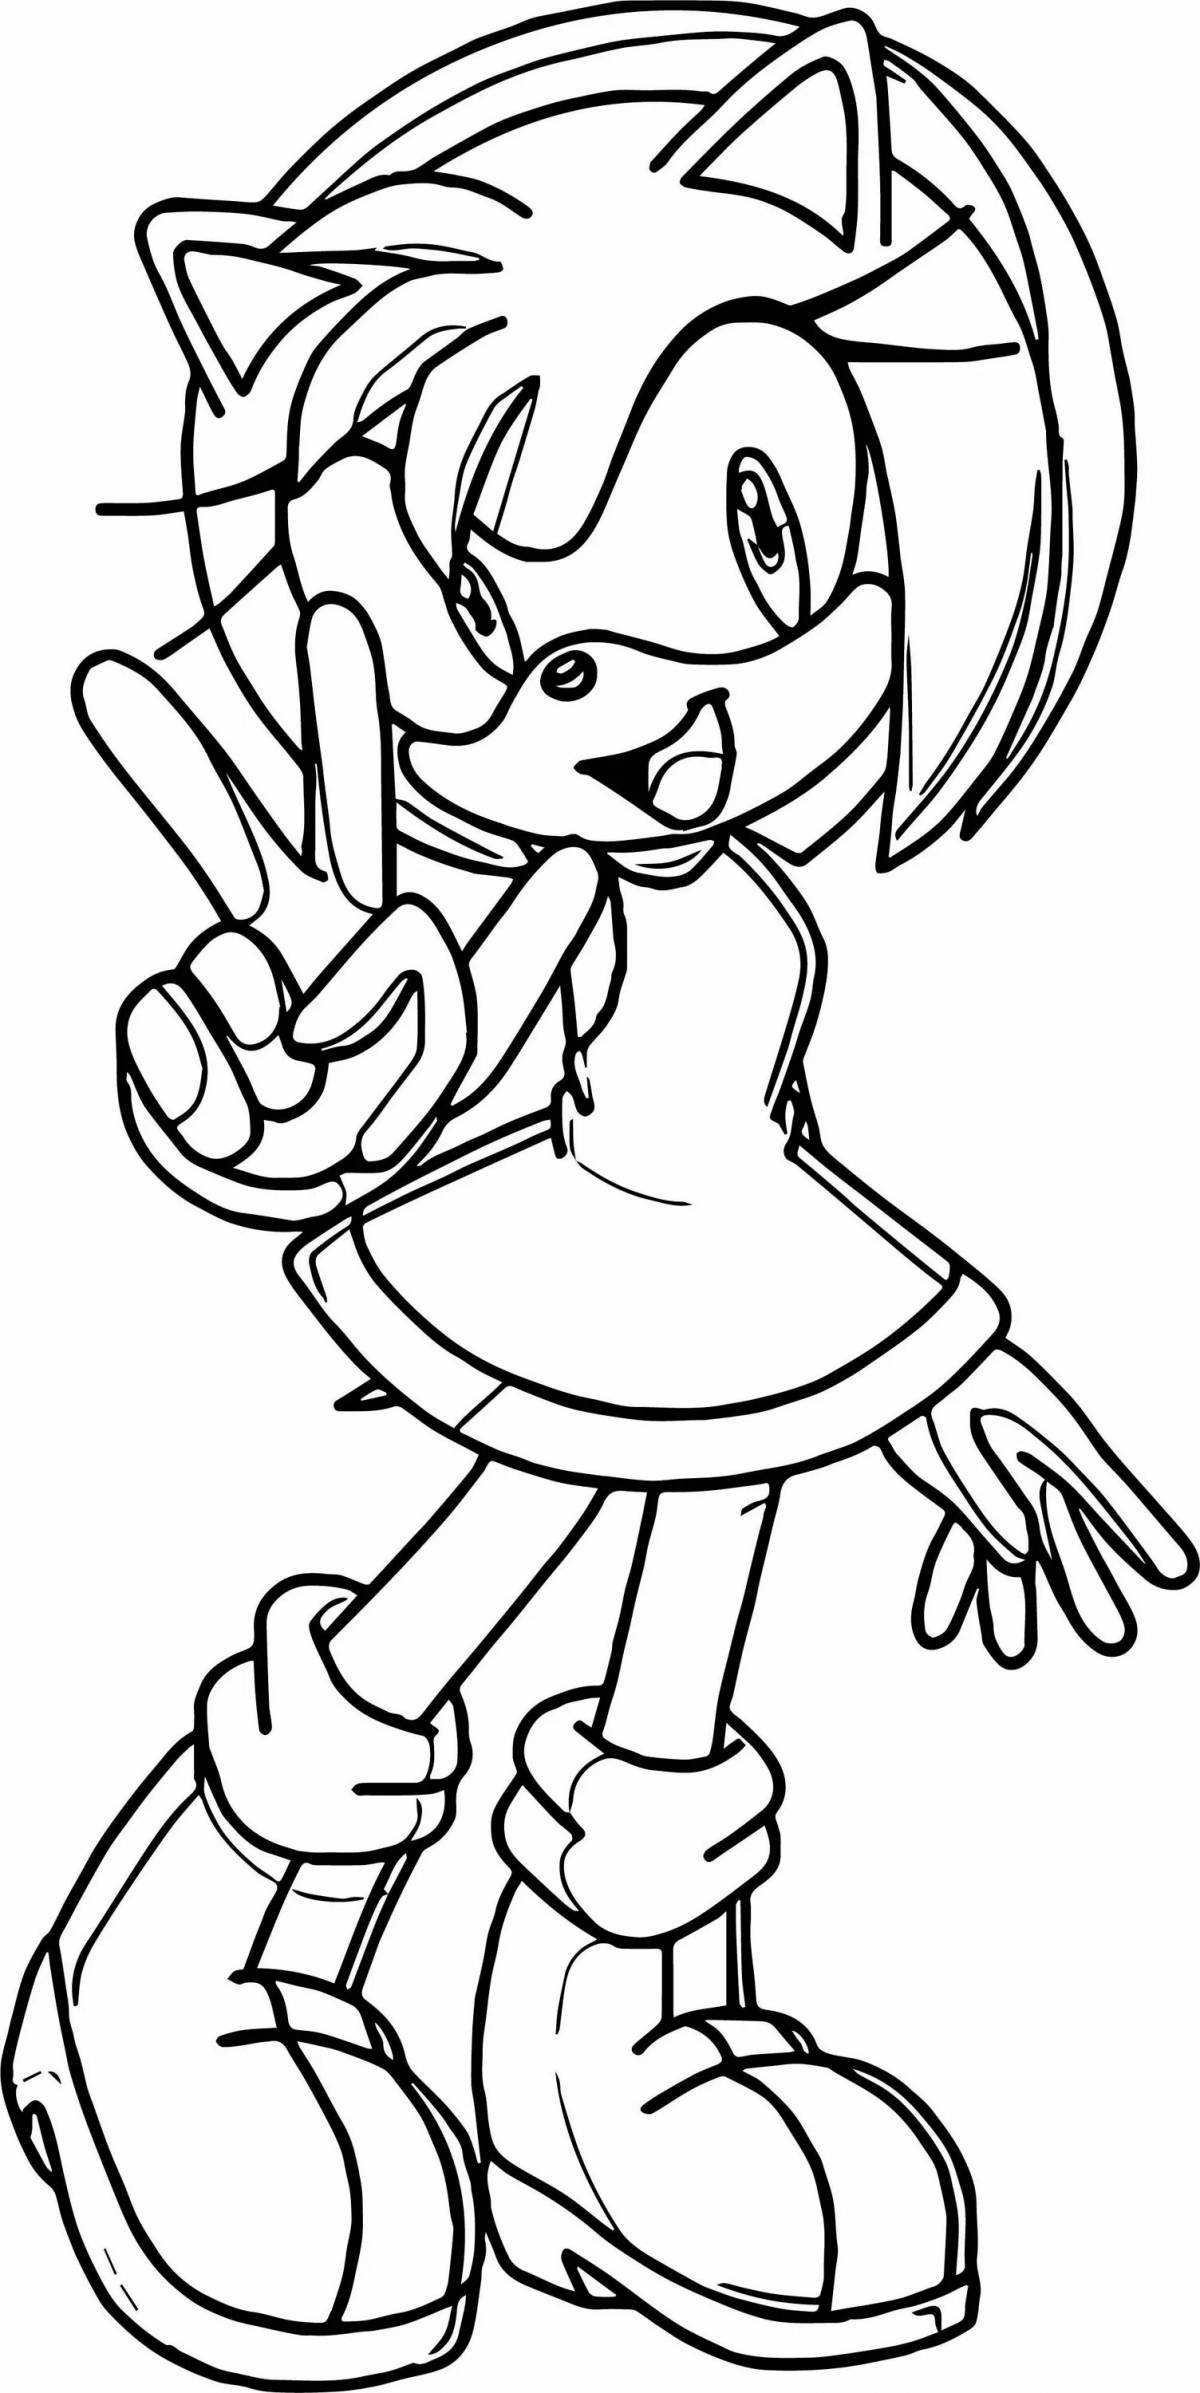 Sonic girl majestic coloring